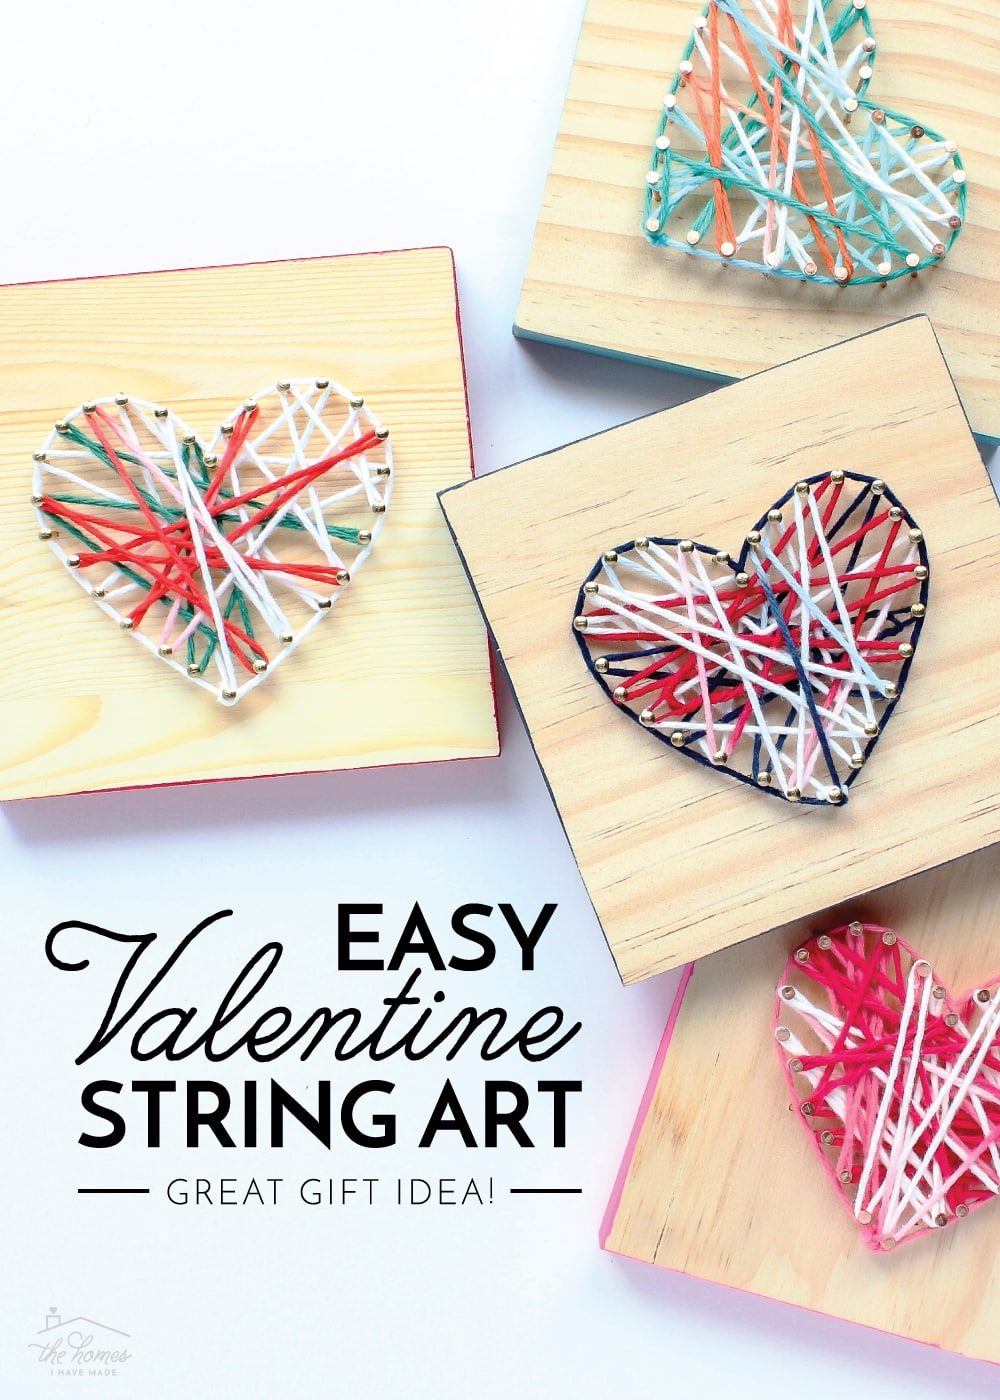 Christmas Wall Decor: Reindeer String Art Tutorial - Babies and  BiscuitsBabies and Biscuits